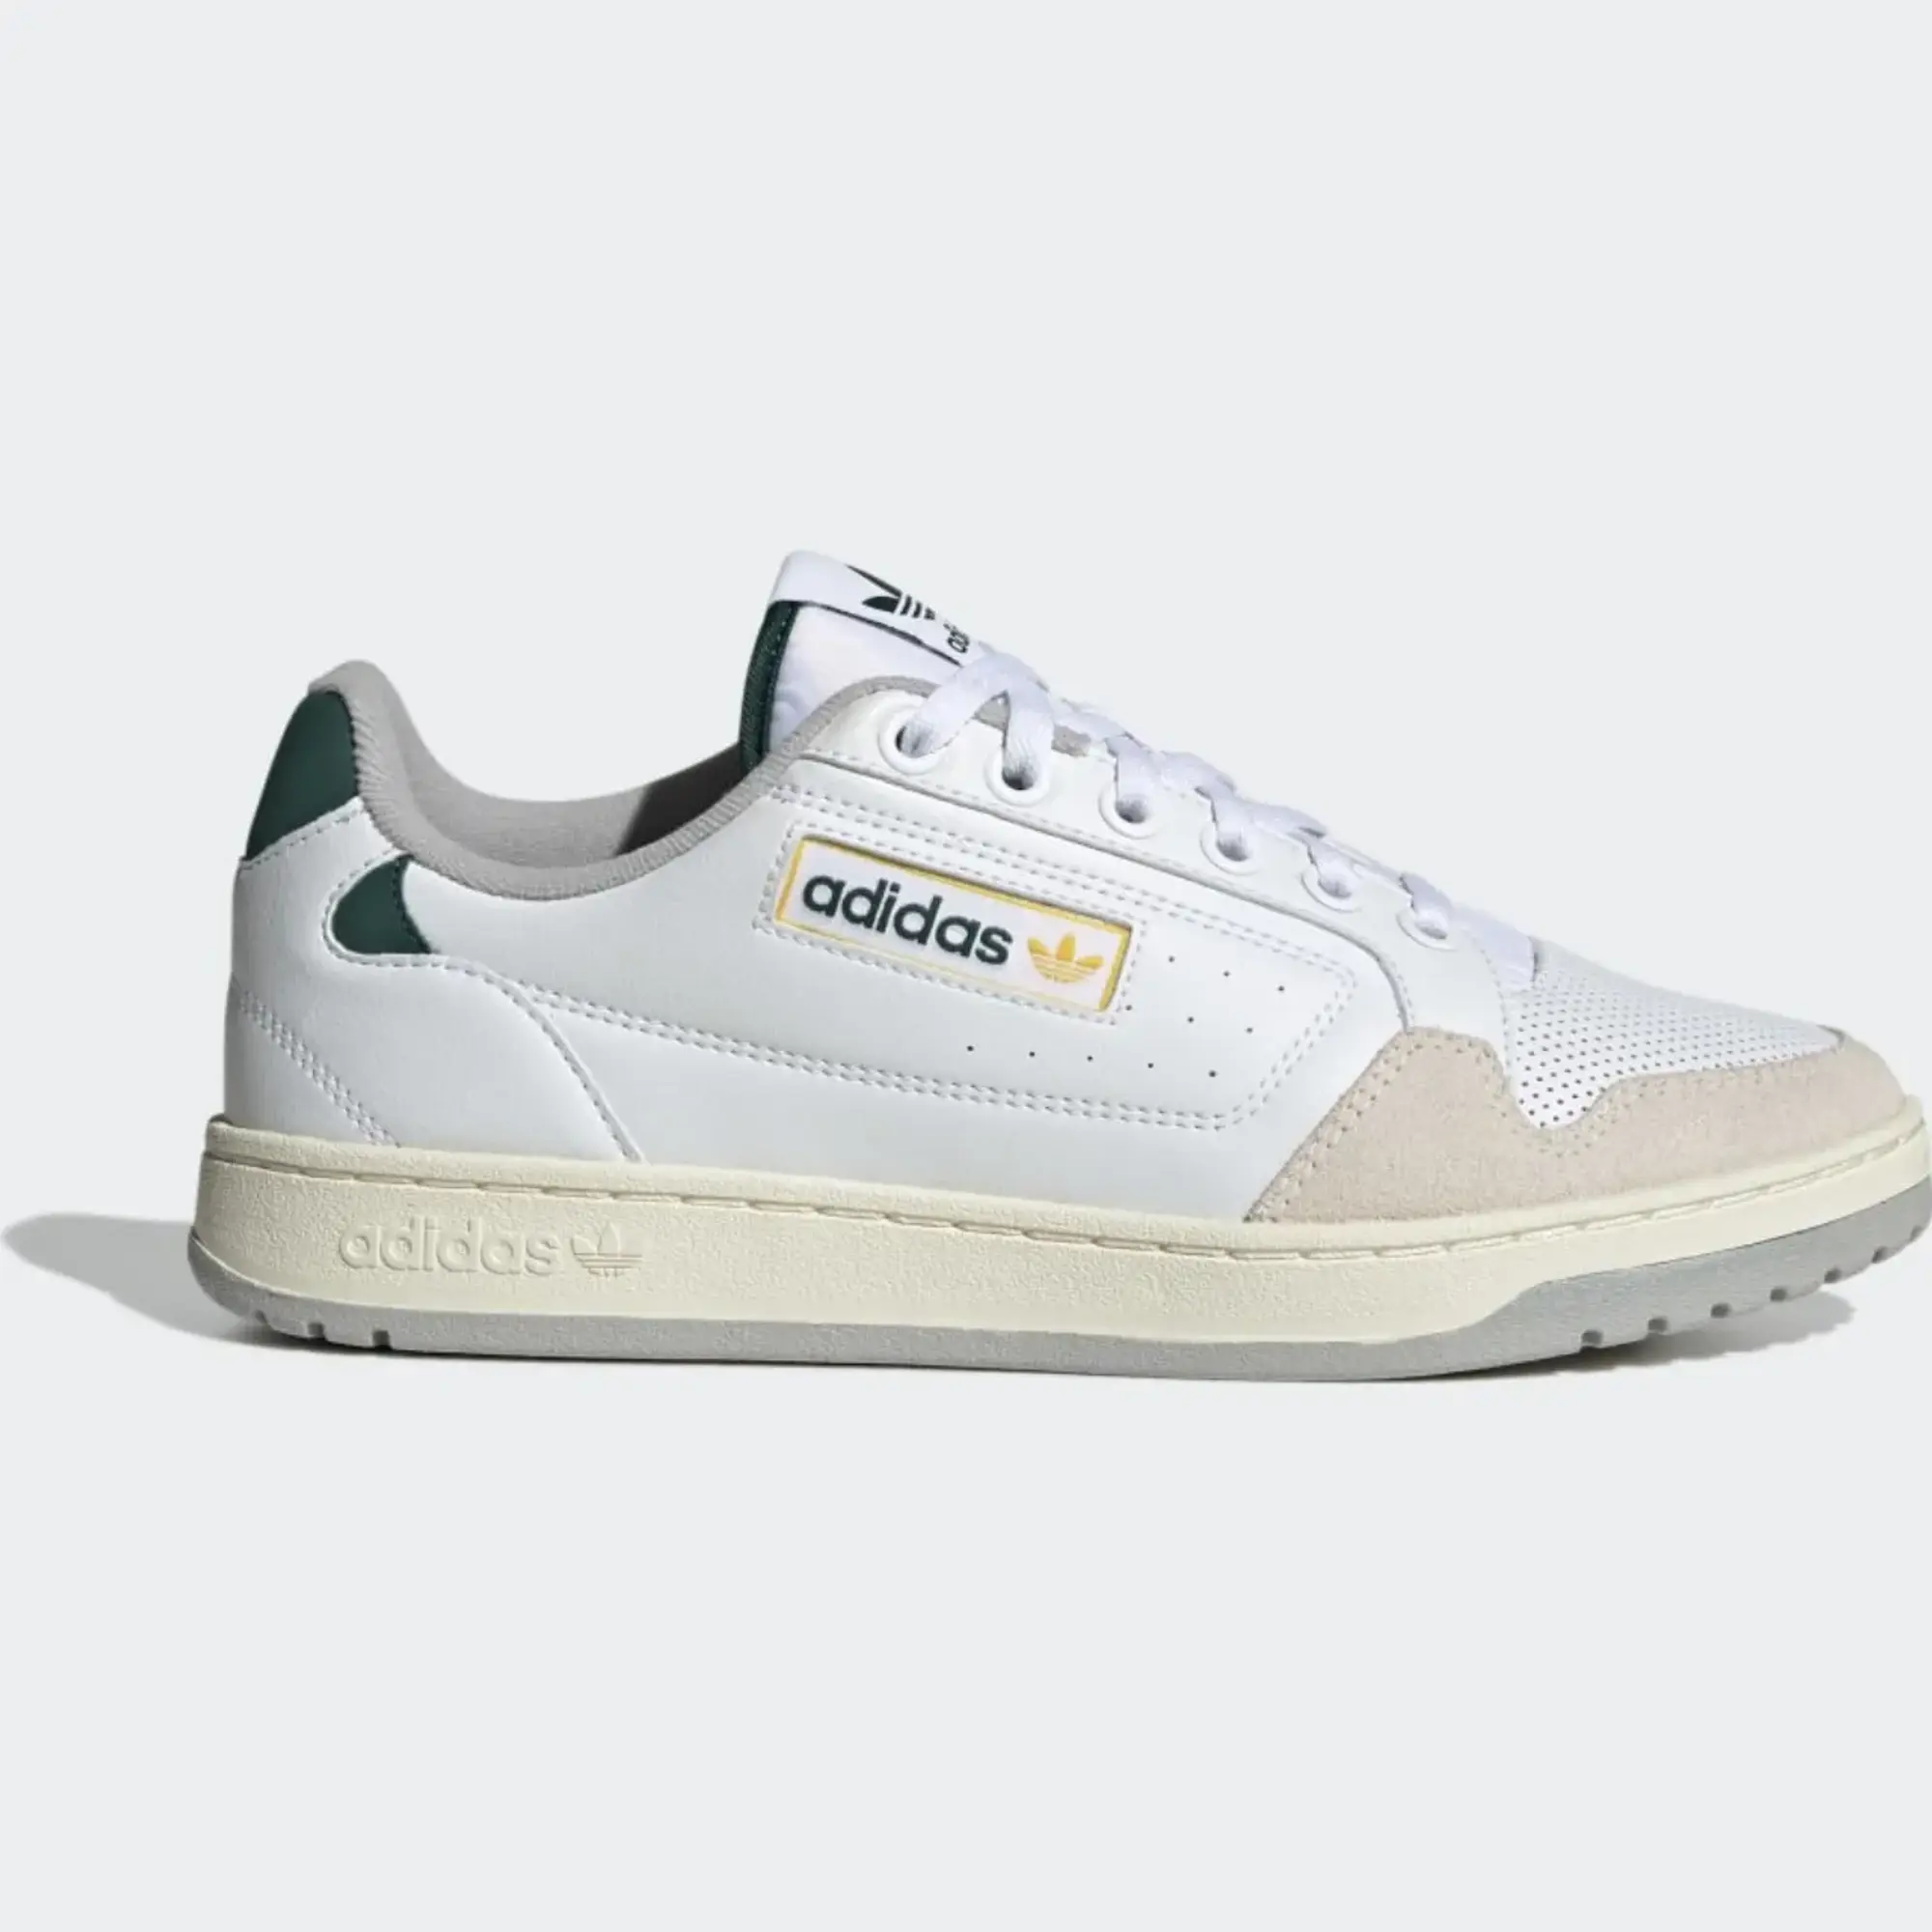 Adidas Originals Ny90 Trainers In White And Green